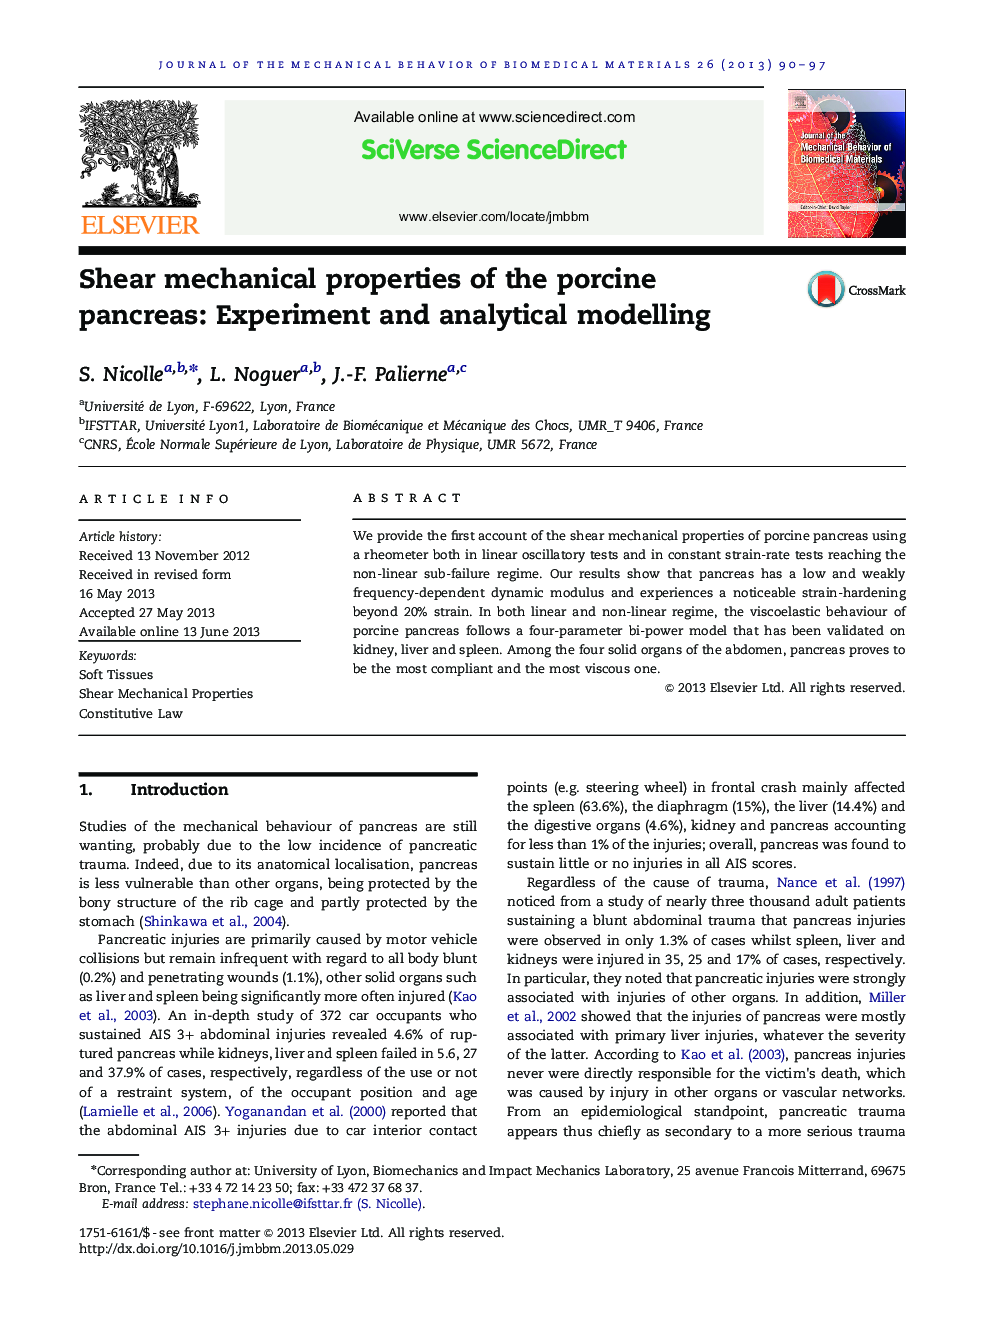 Shear mechanical properties of the porcine pancreas: Experiment and analytical modelling